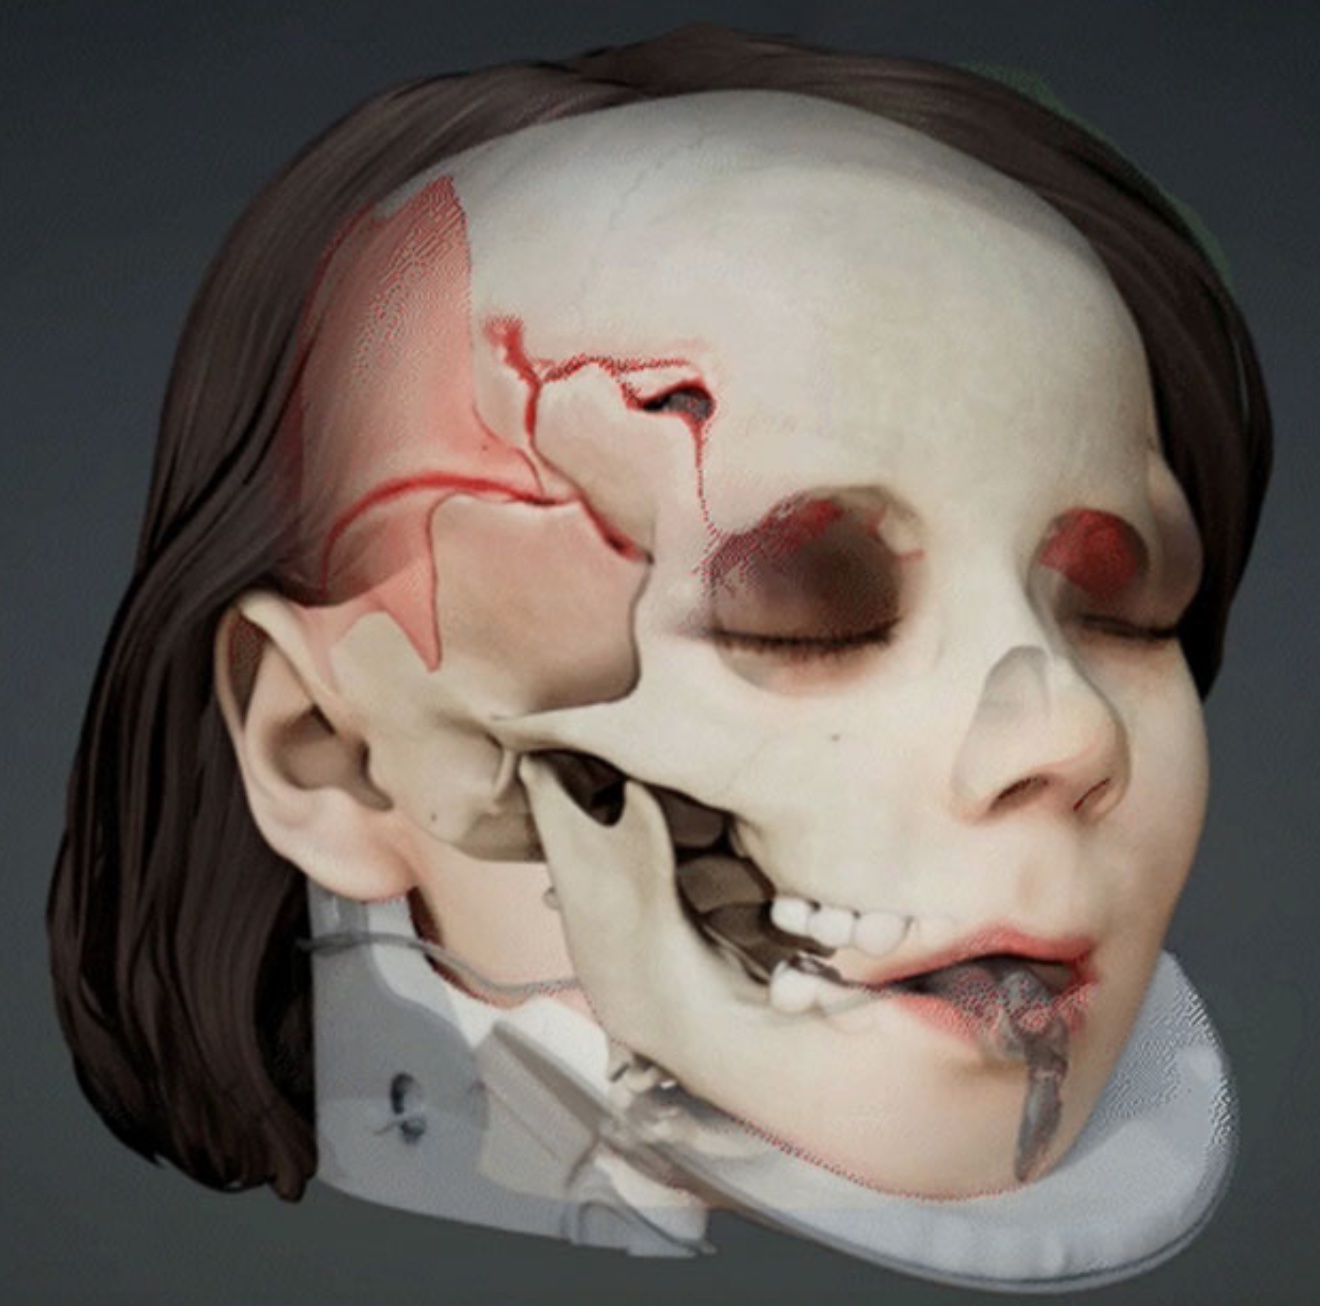 Rendering of a scan of victim's head injuries; image courtesy of Crosley Law.